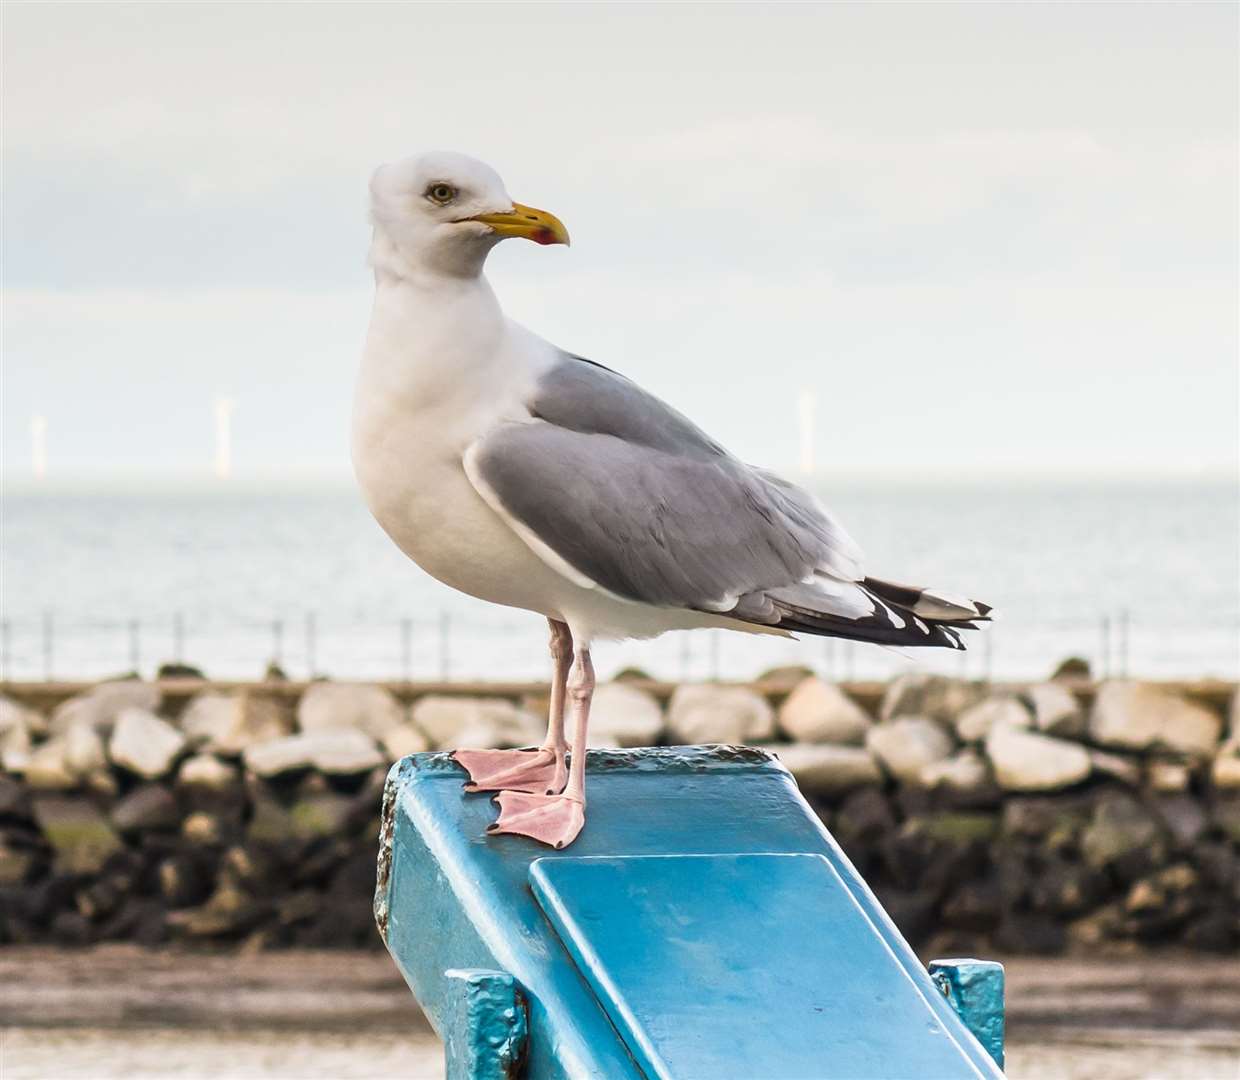 It is illegal to kill seagulls in the UK unless they pose a significant risk to public safety